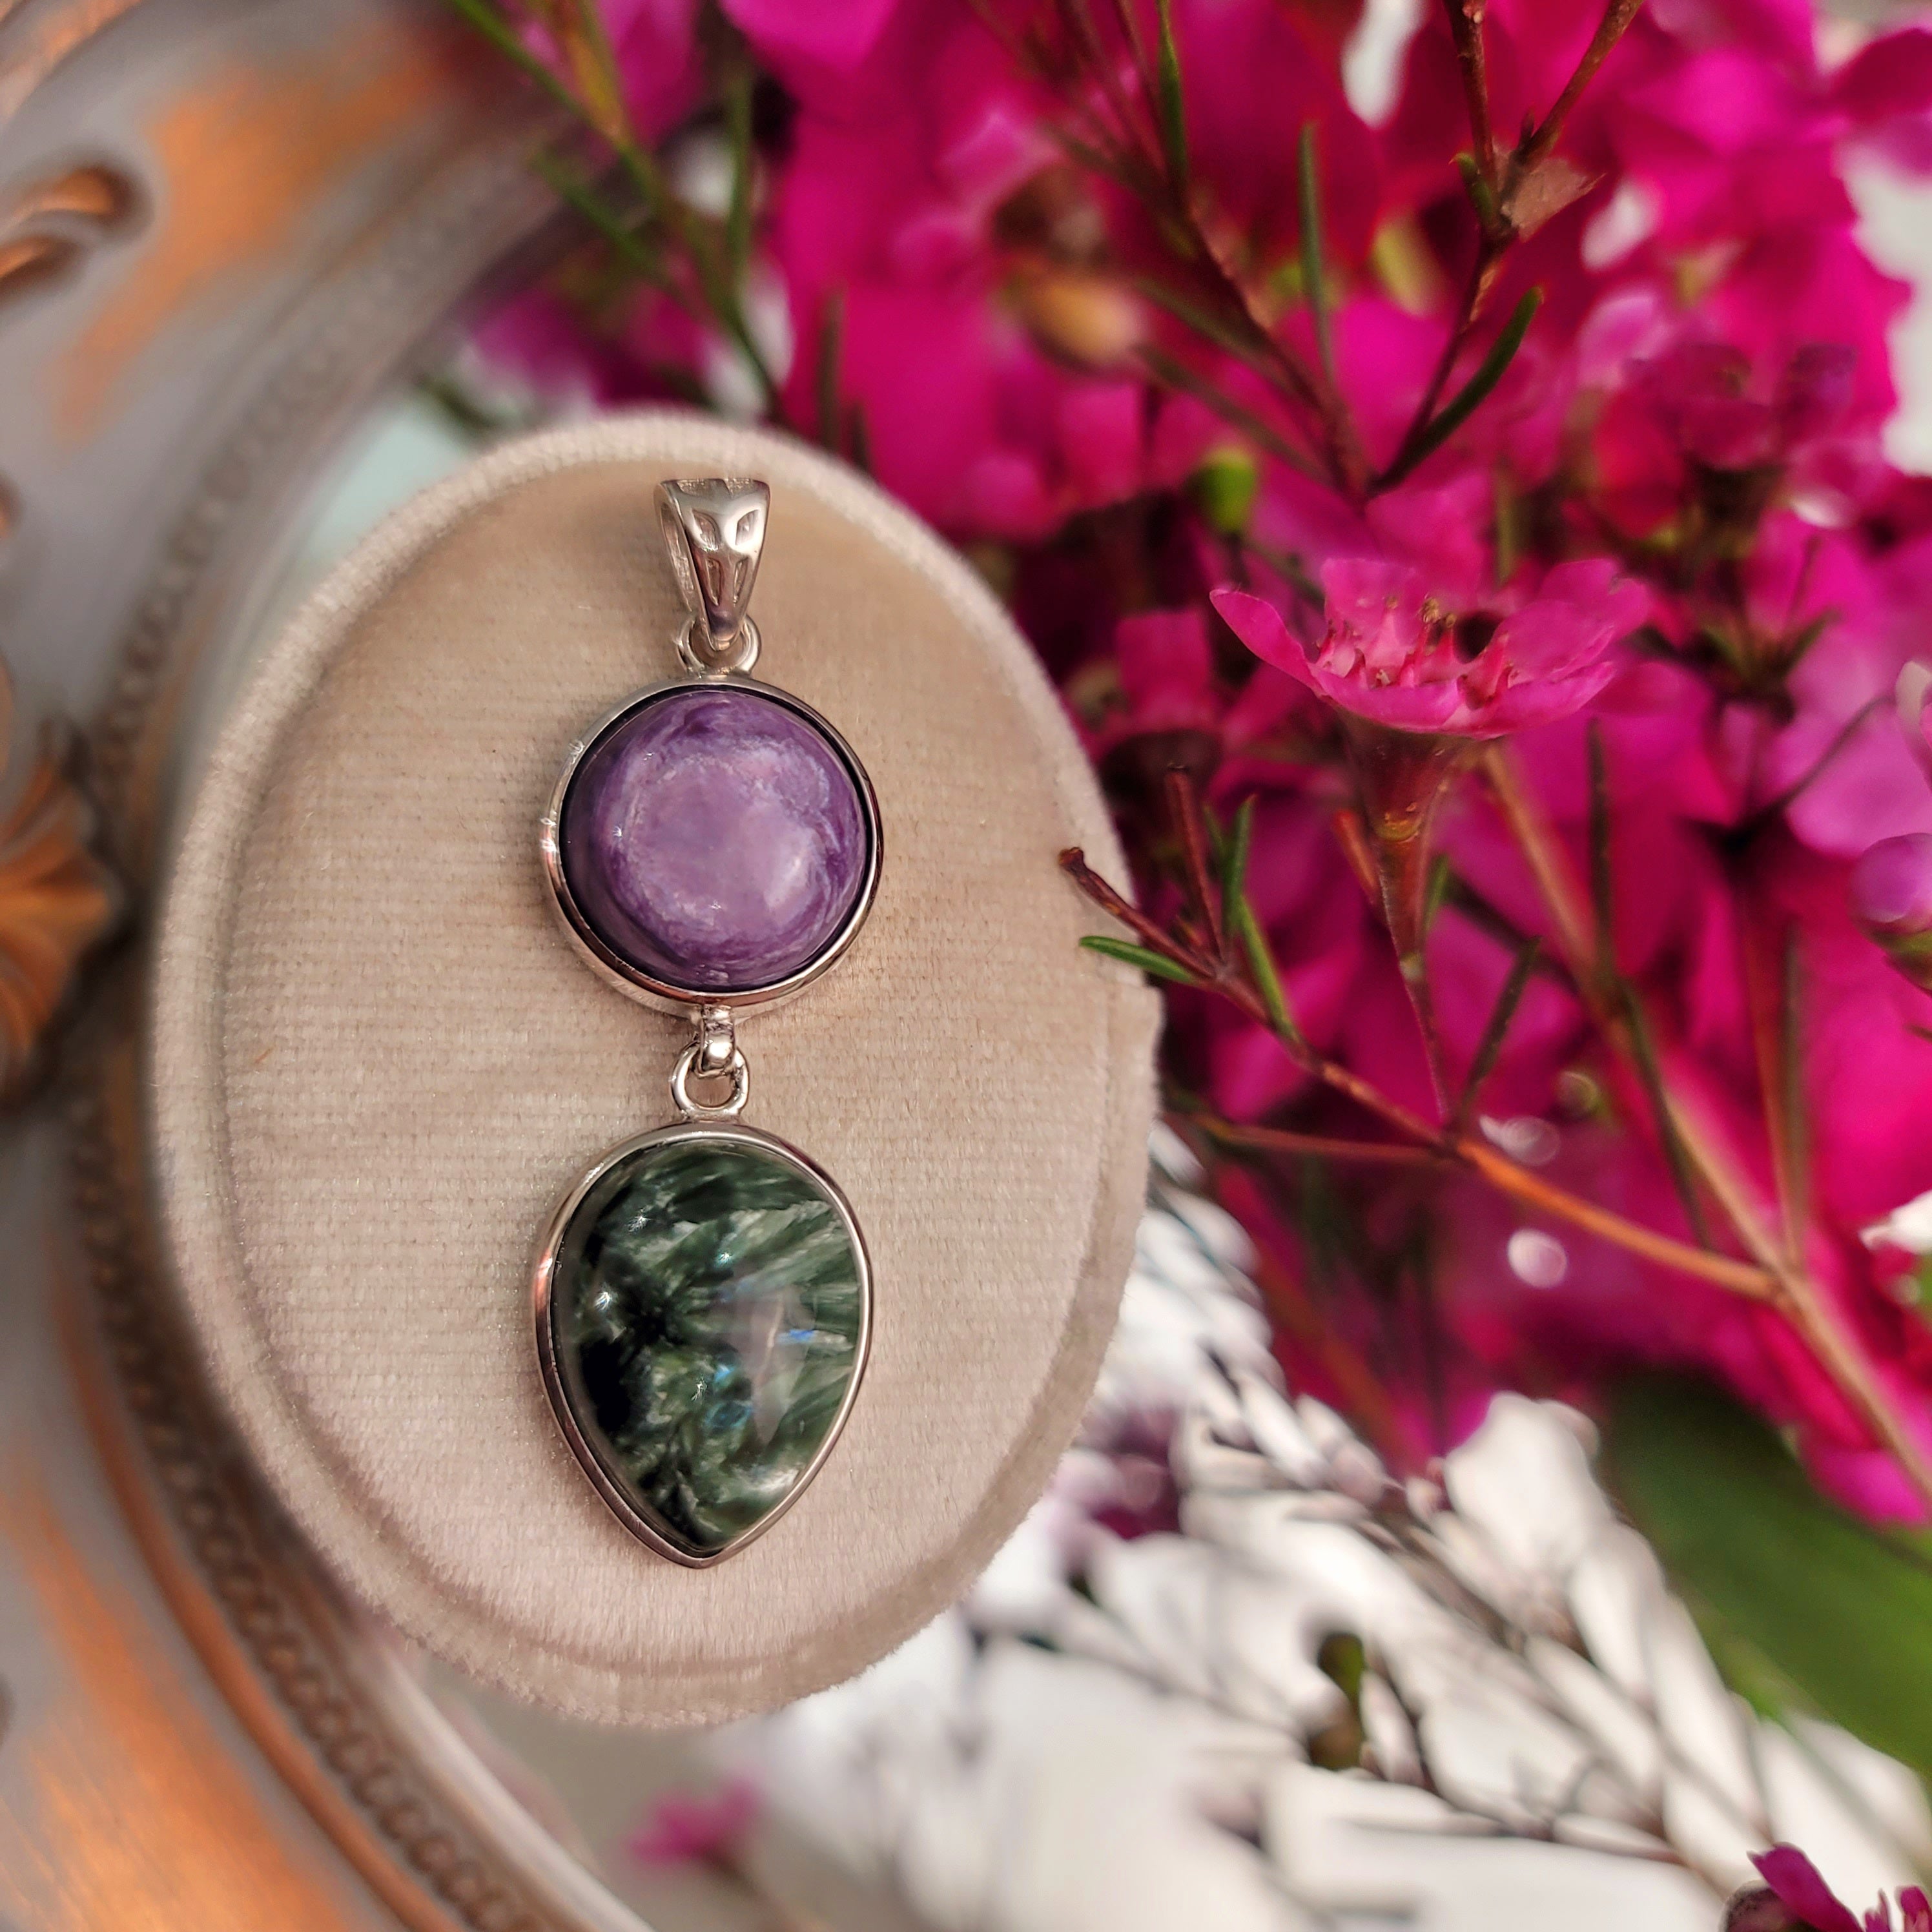 Charoite x Seraphinite Pendant for Connection with the Divine Source and your Higher Self